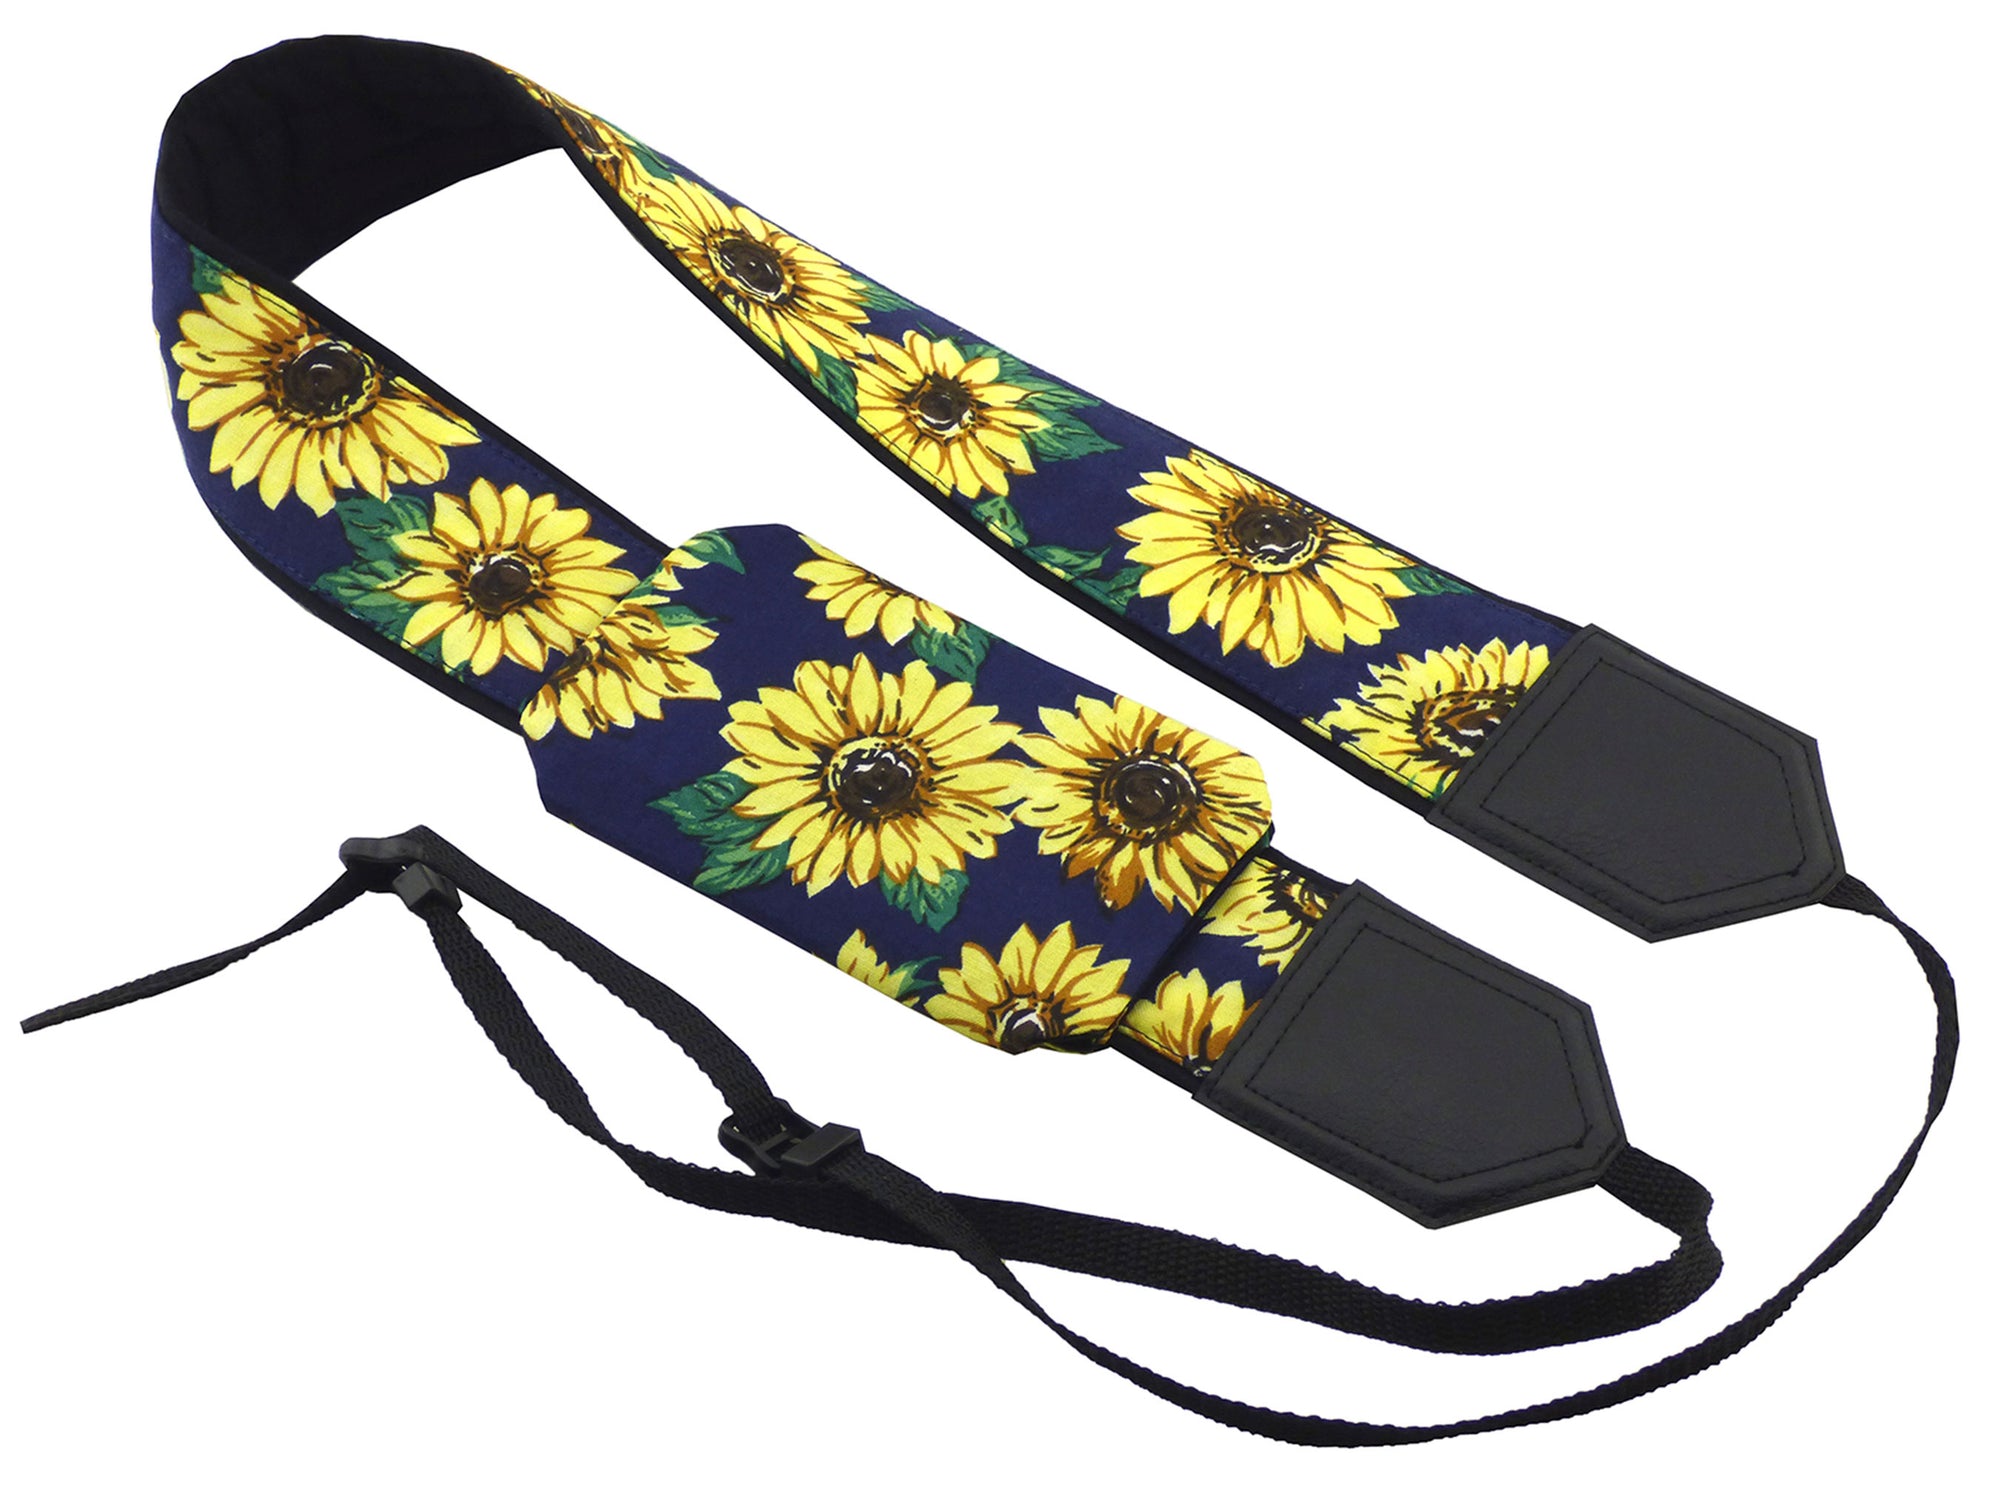 How to Add Adjustable Straps to Sunflower – Sunflower Seams